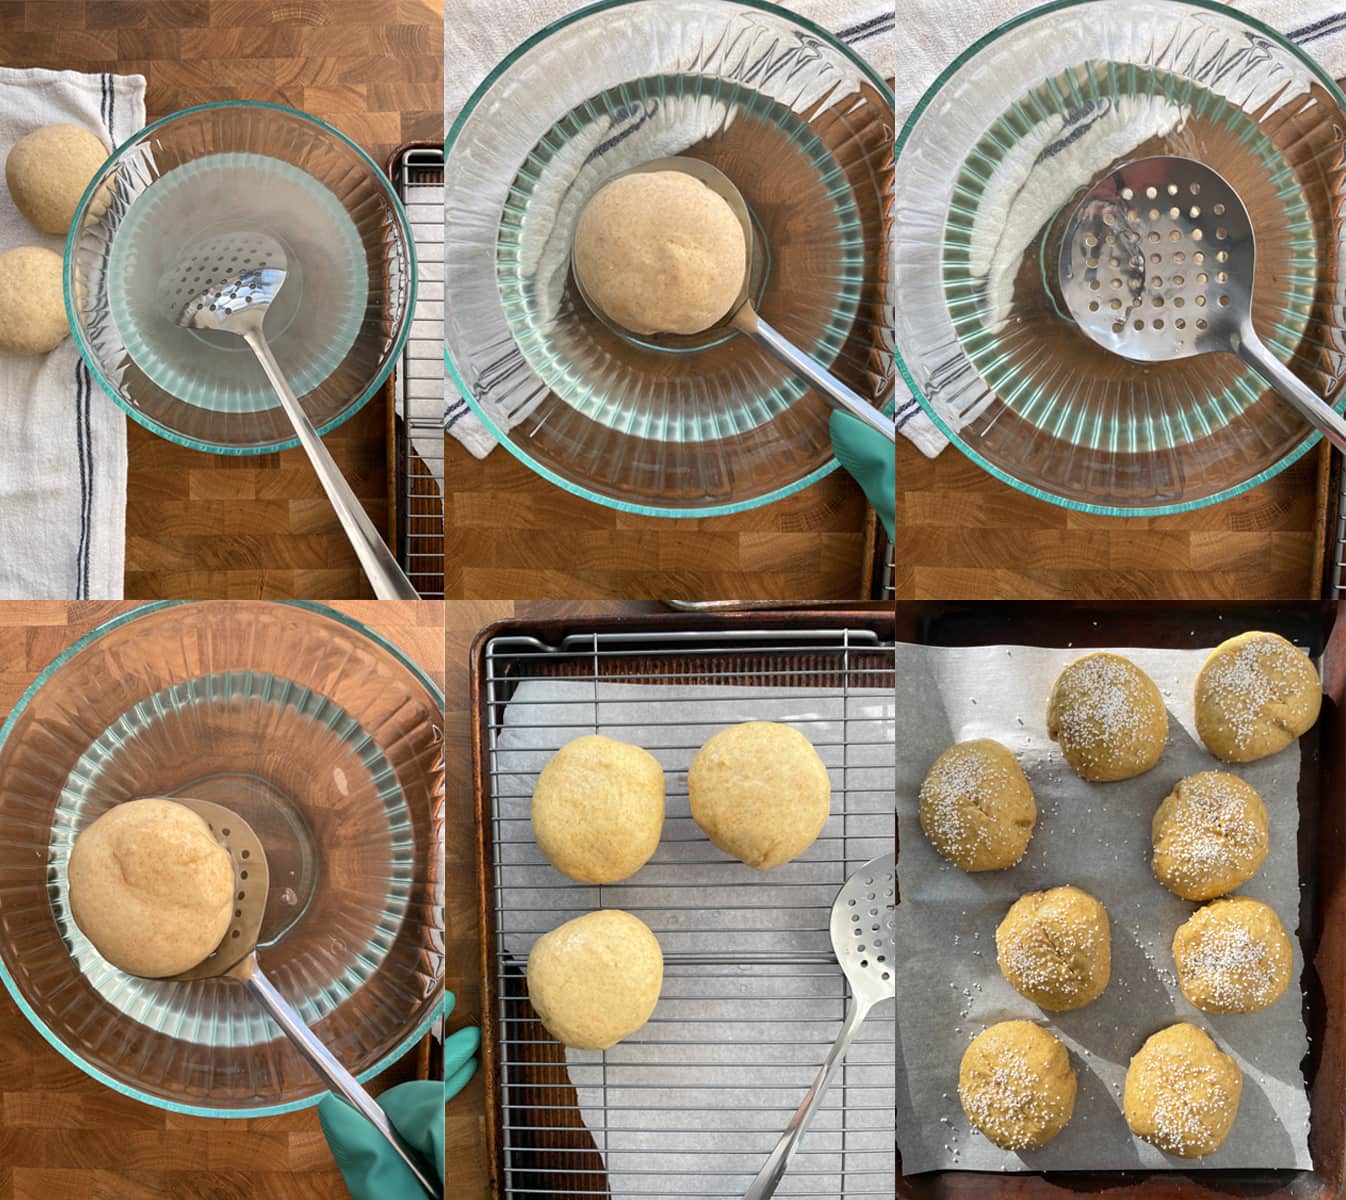 Process images for dipping the pretzel rolls in lye, scoring and salting them.